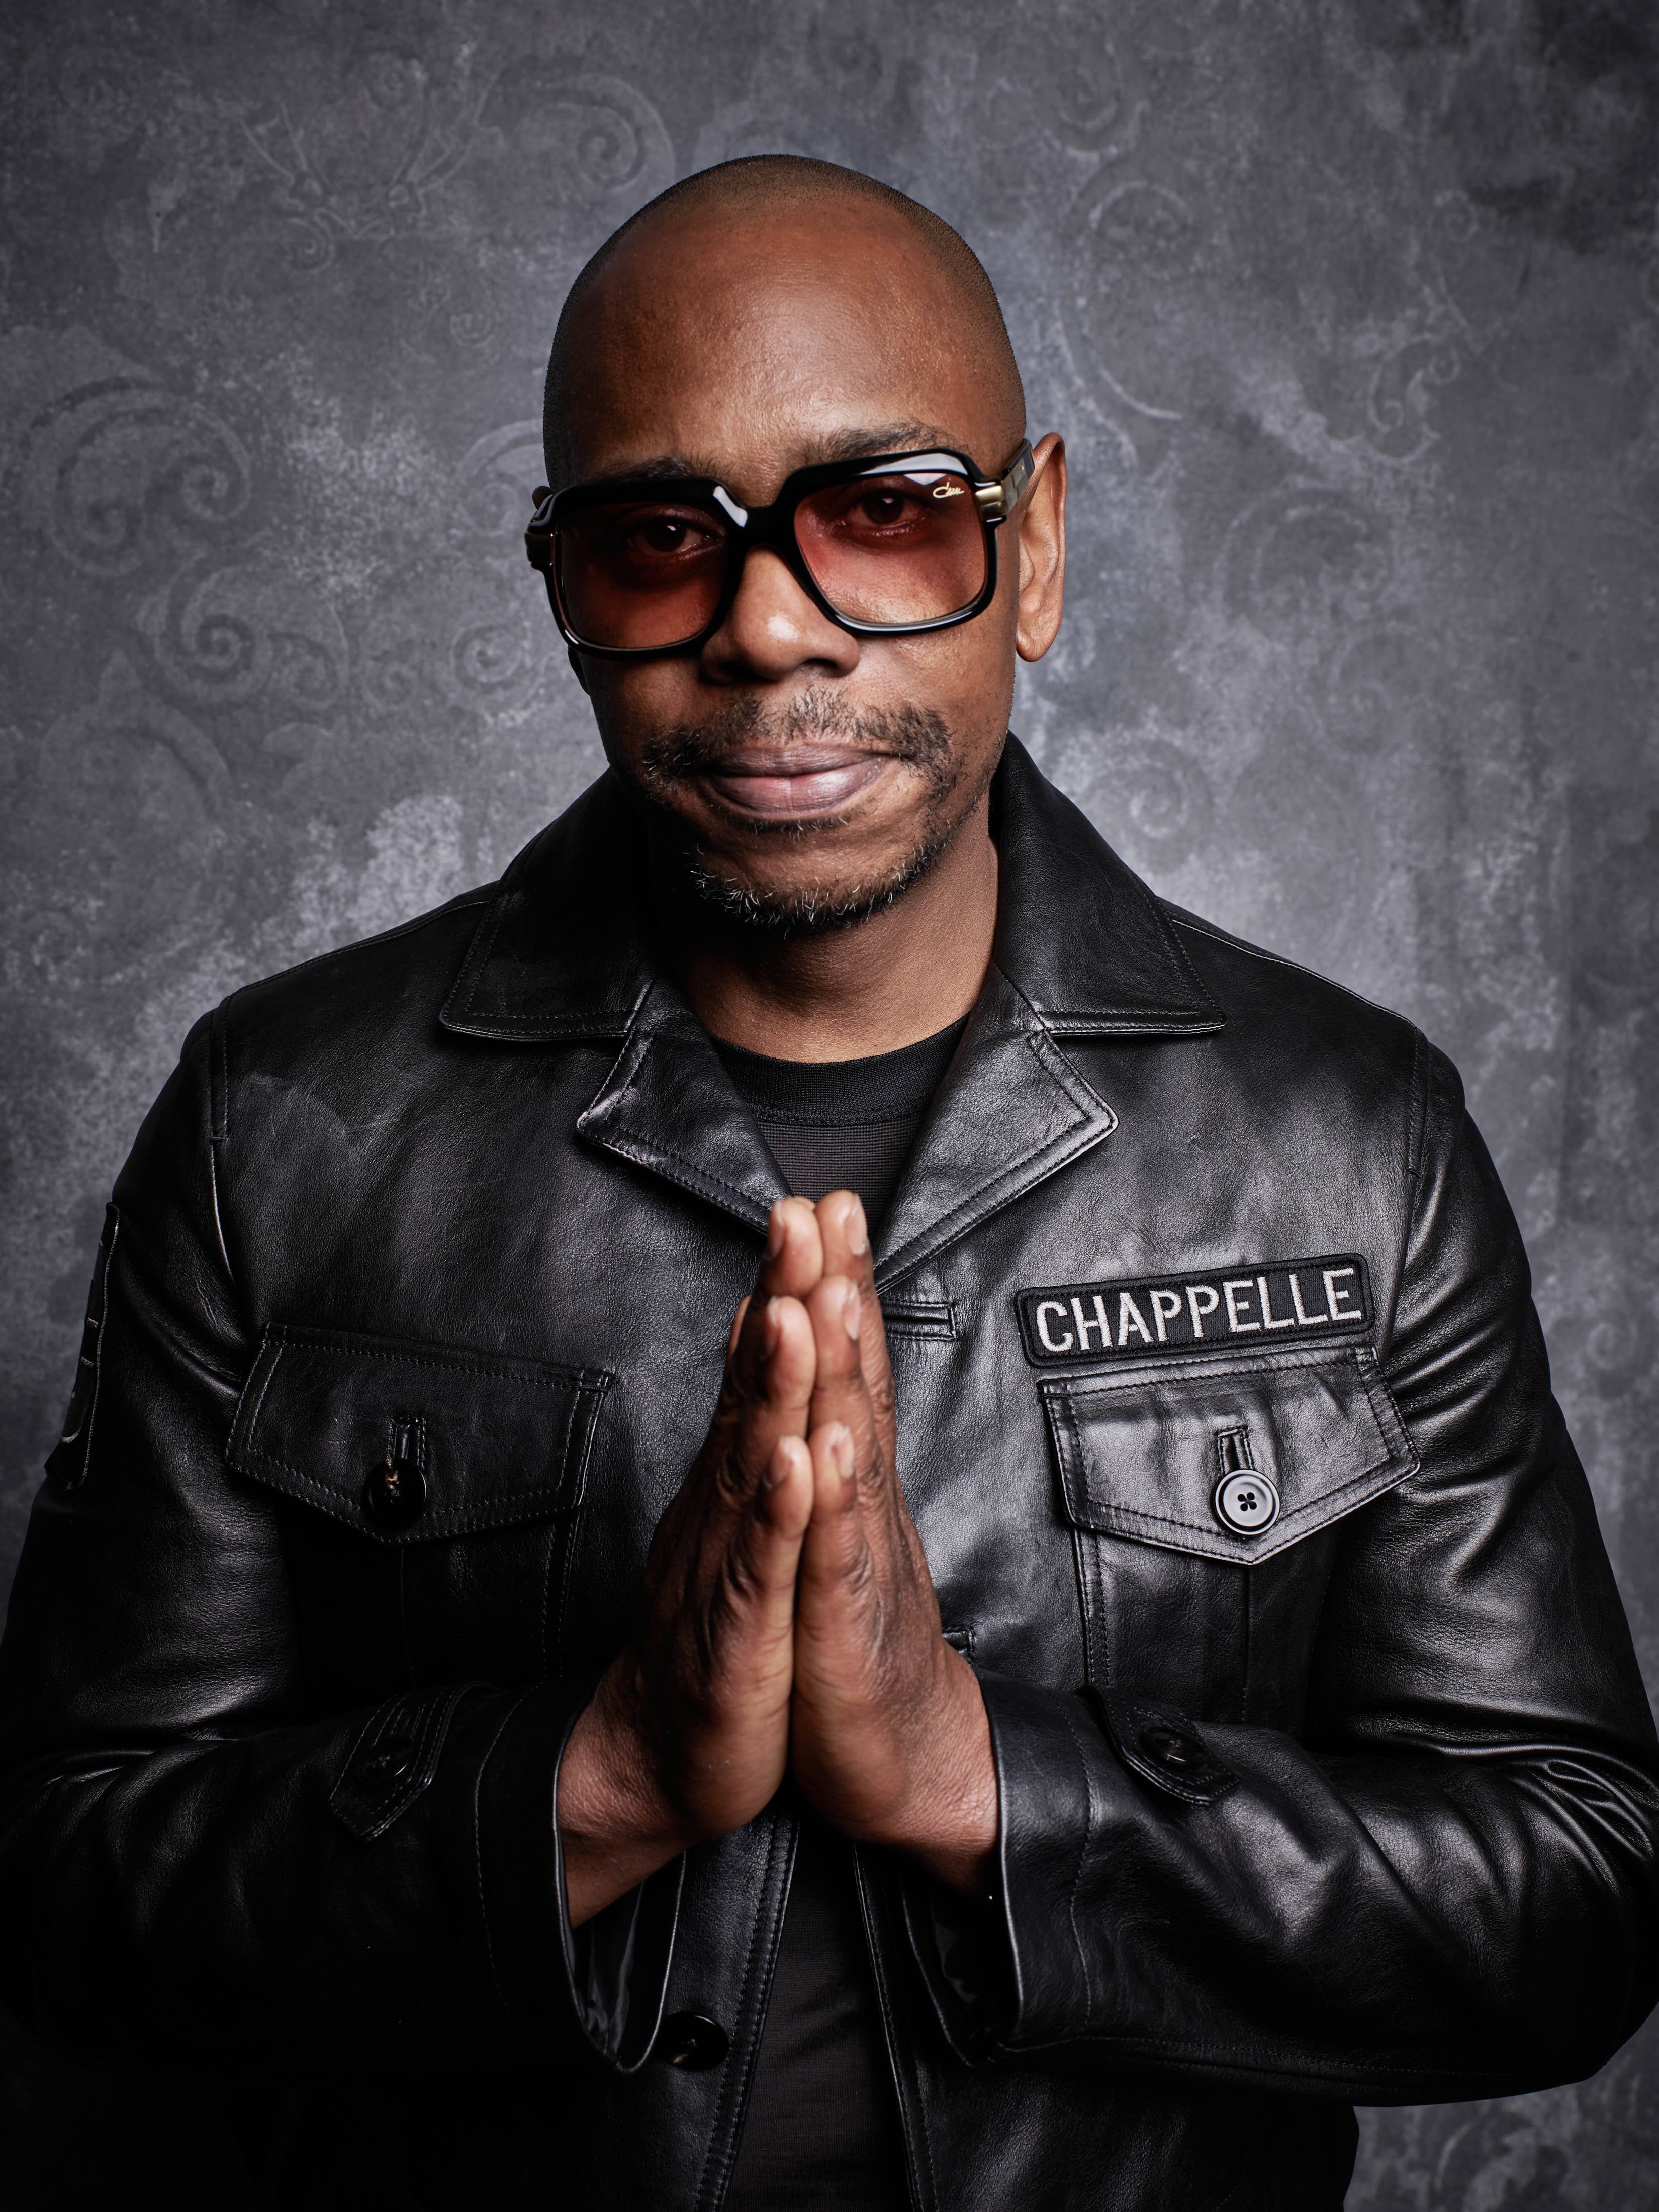 Dave Chappelle to receive 2019 Mark Twain Prize for American Humor